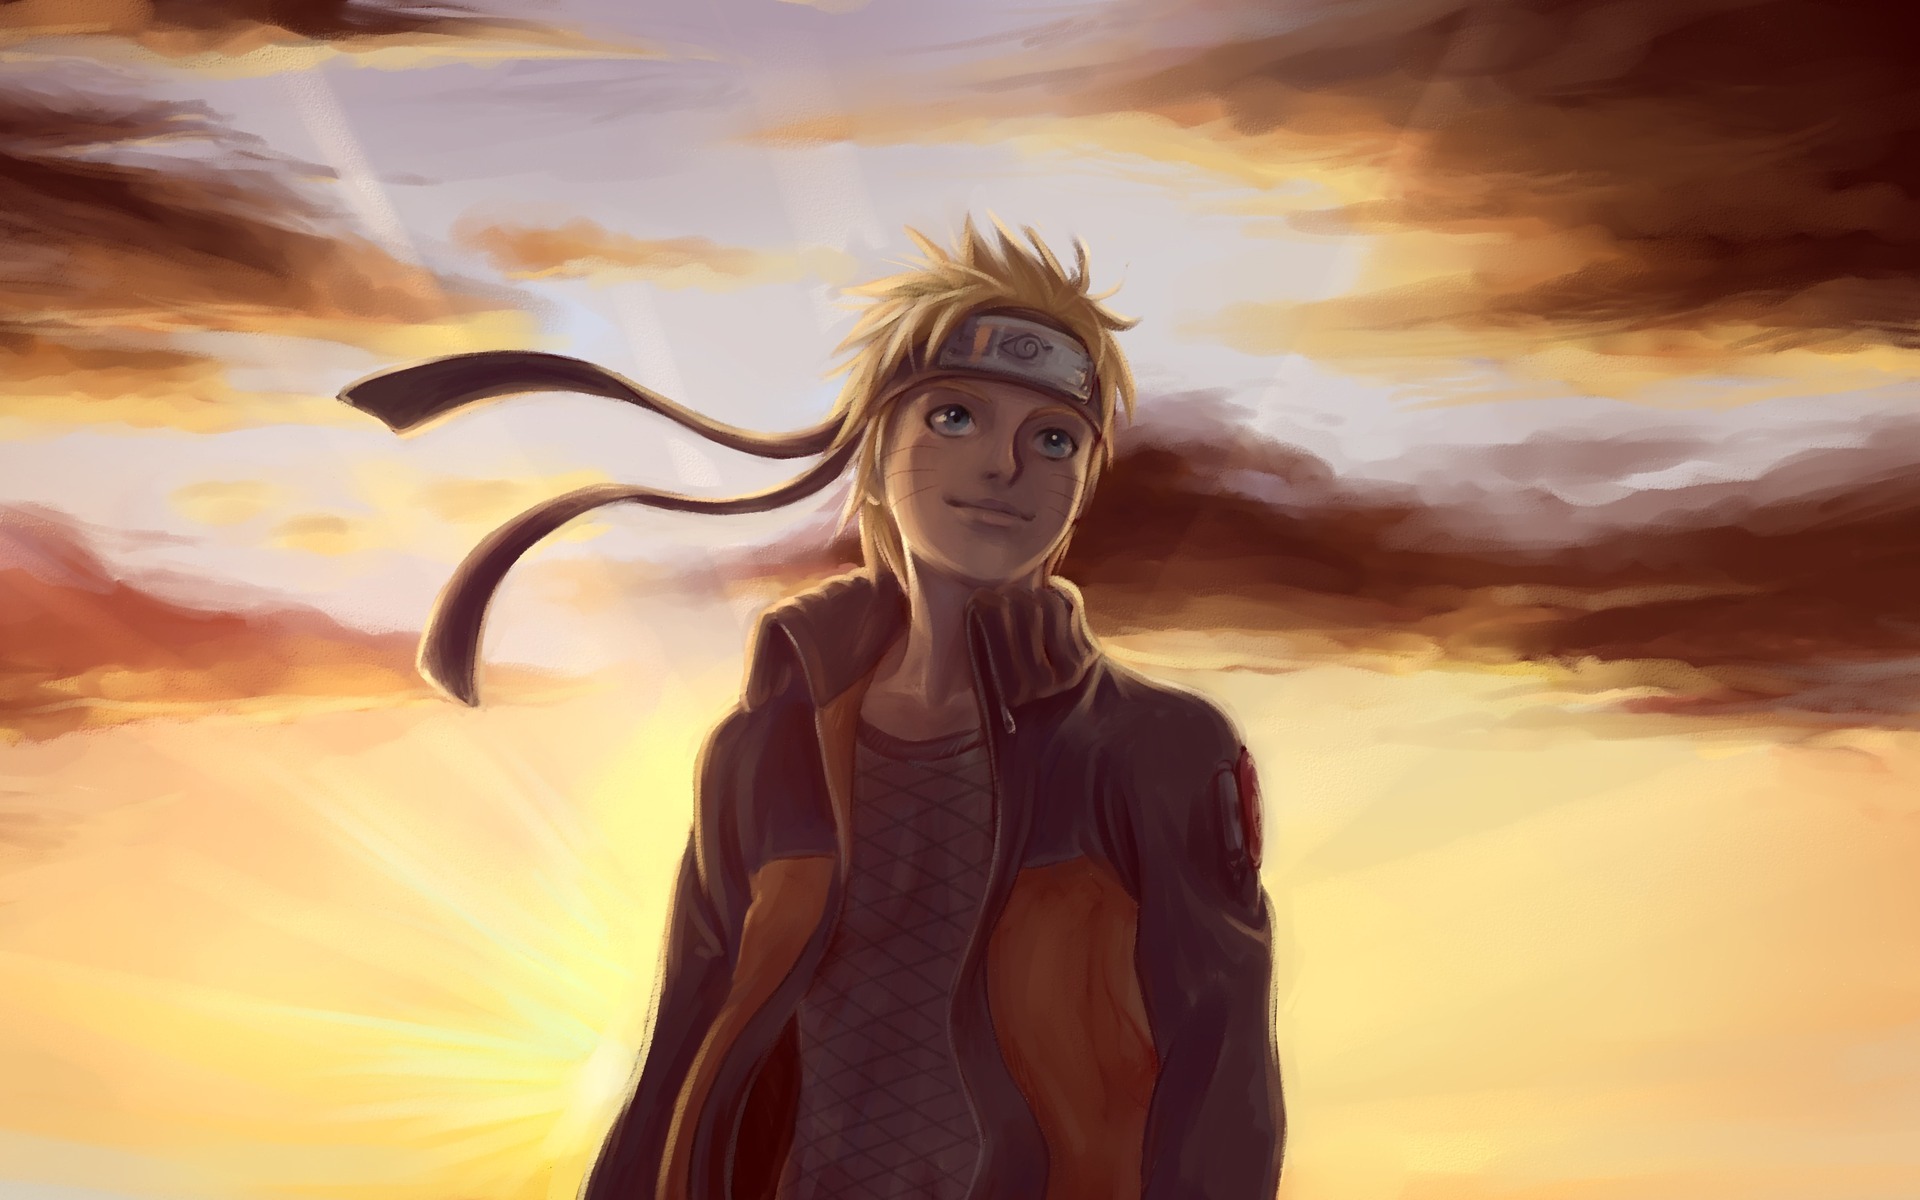 Download Naruto wallpaper for mobile phone, free Naruto HD picture